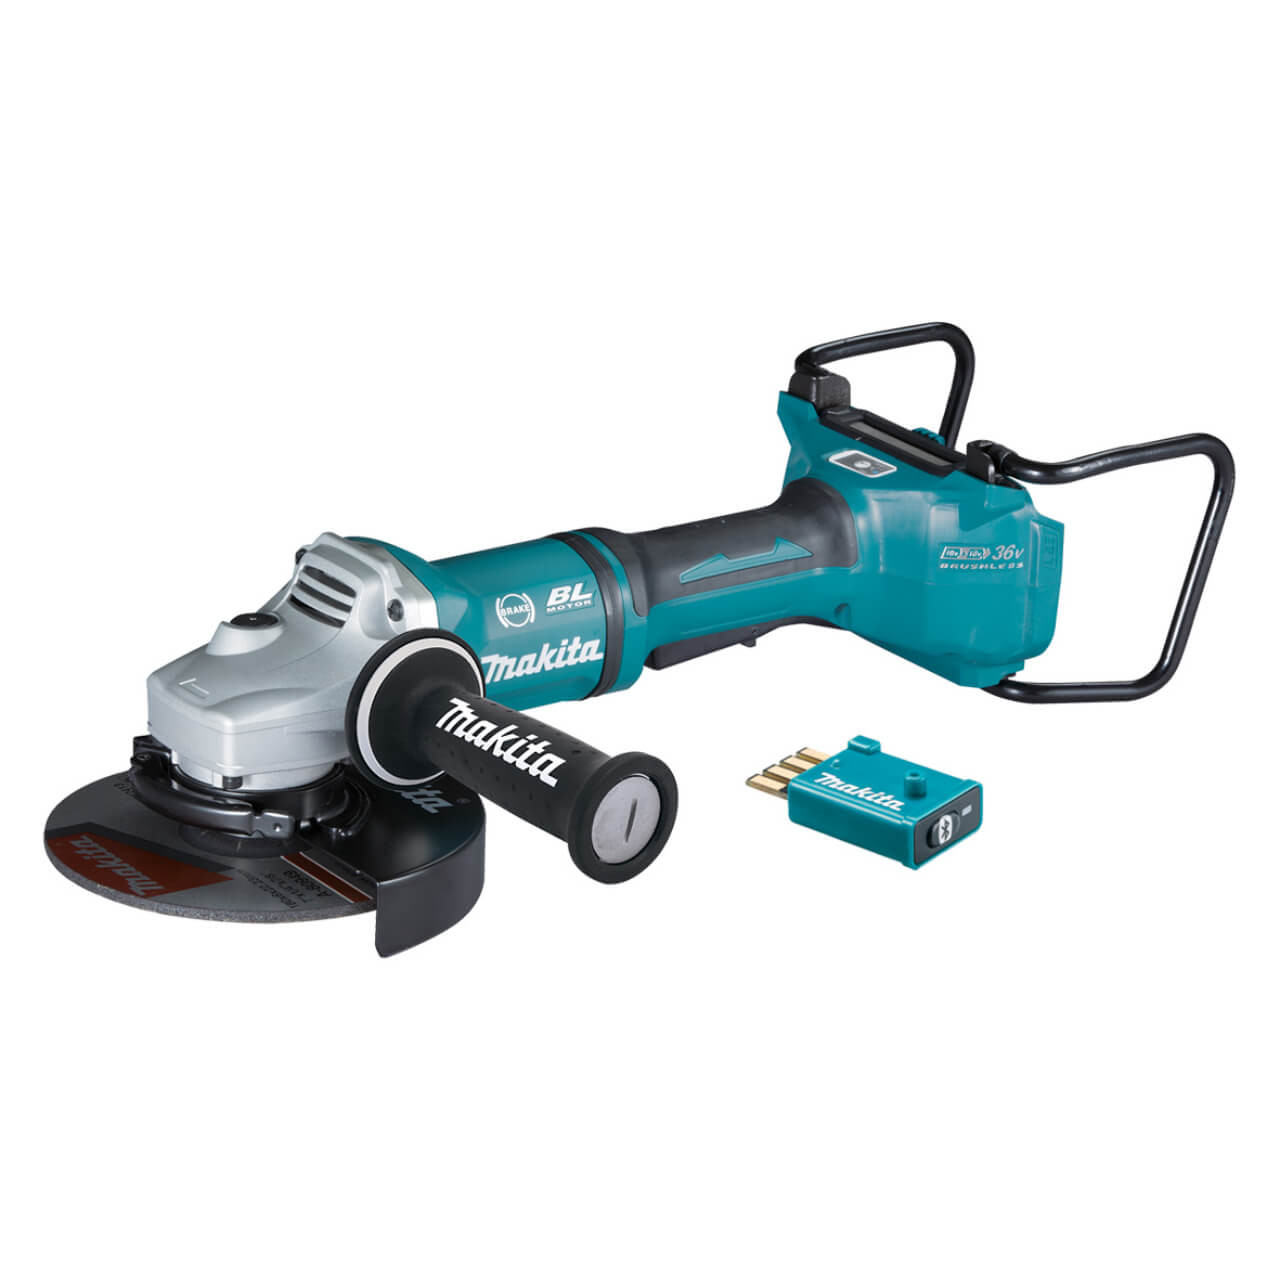 Makita 18Vx2 BRUSHLESS AWS 180mm (7”) Angle Grinder. Paddle Switch. Kick Back Detection. Electric Brake. Anti-Vib Handle & Carry Case - Tool Only